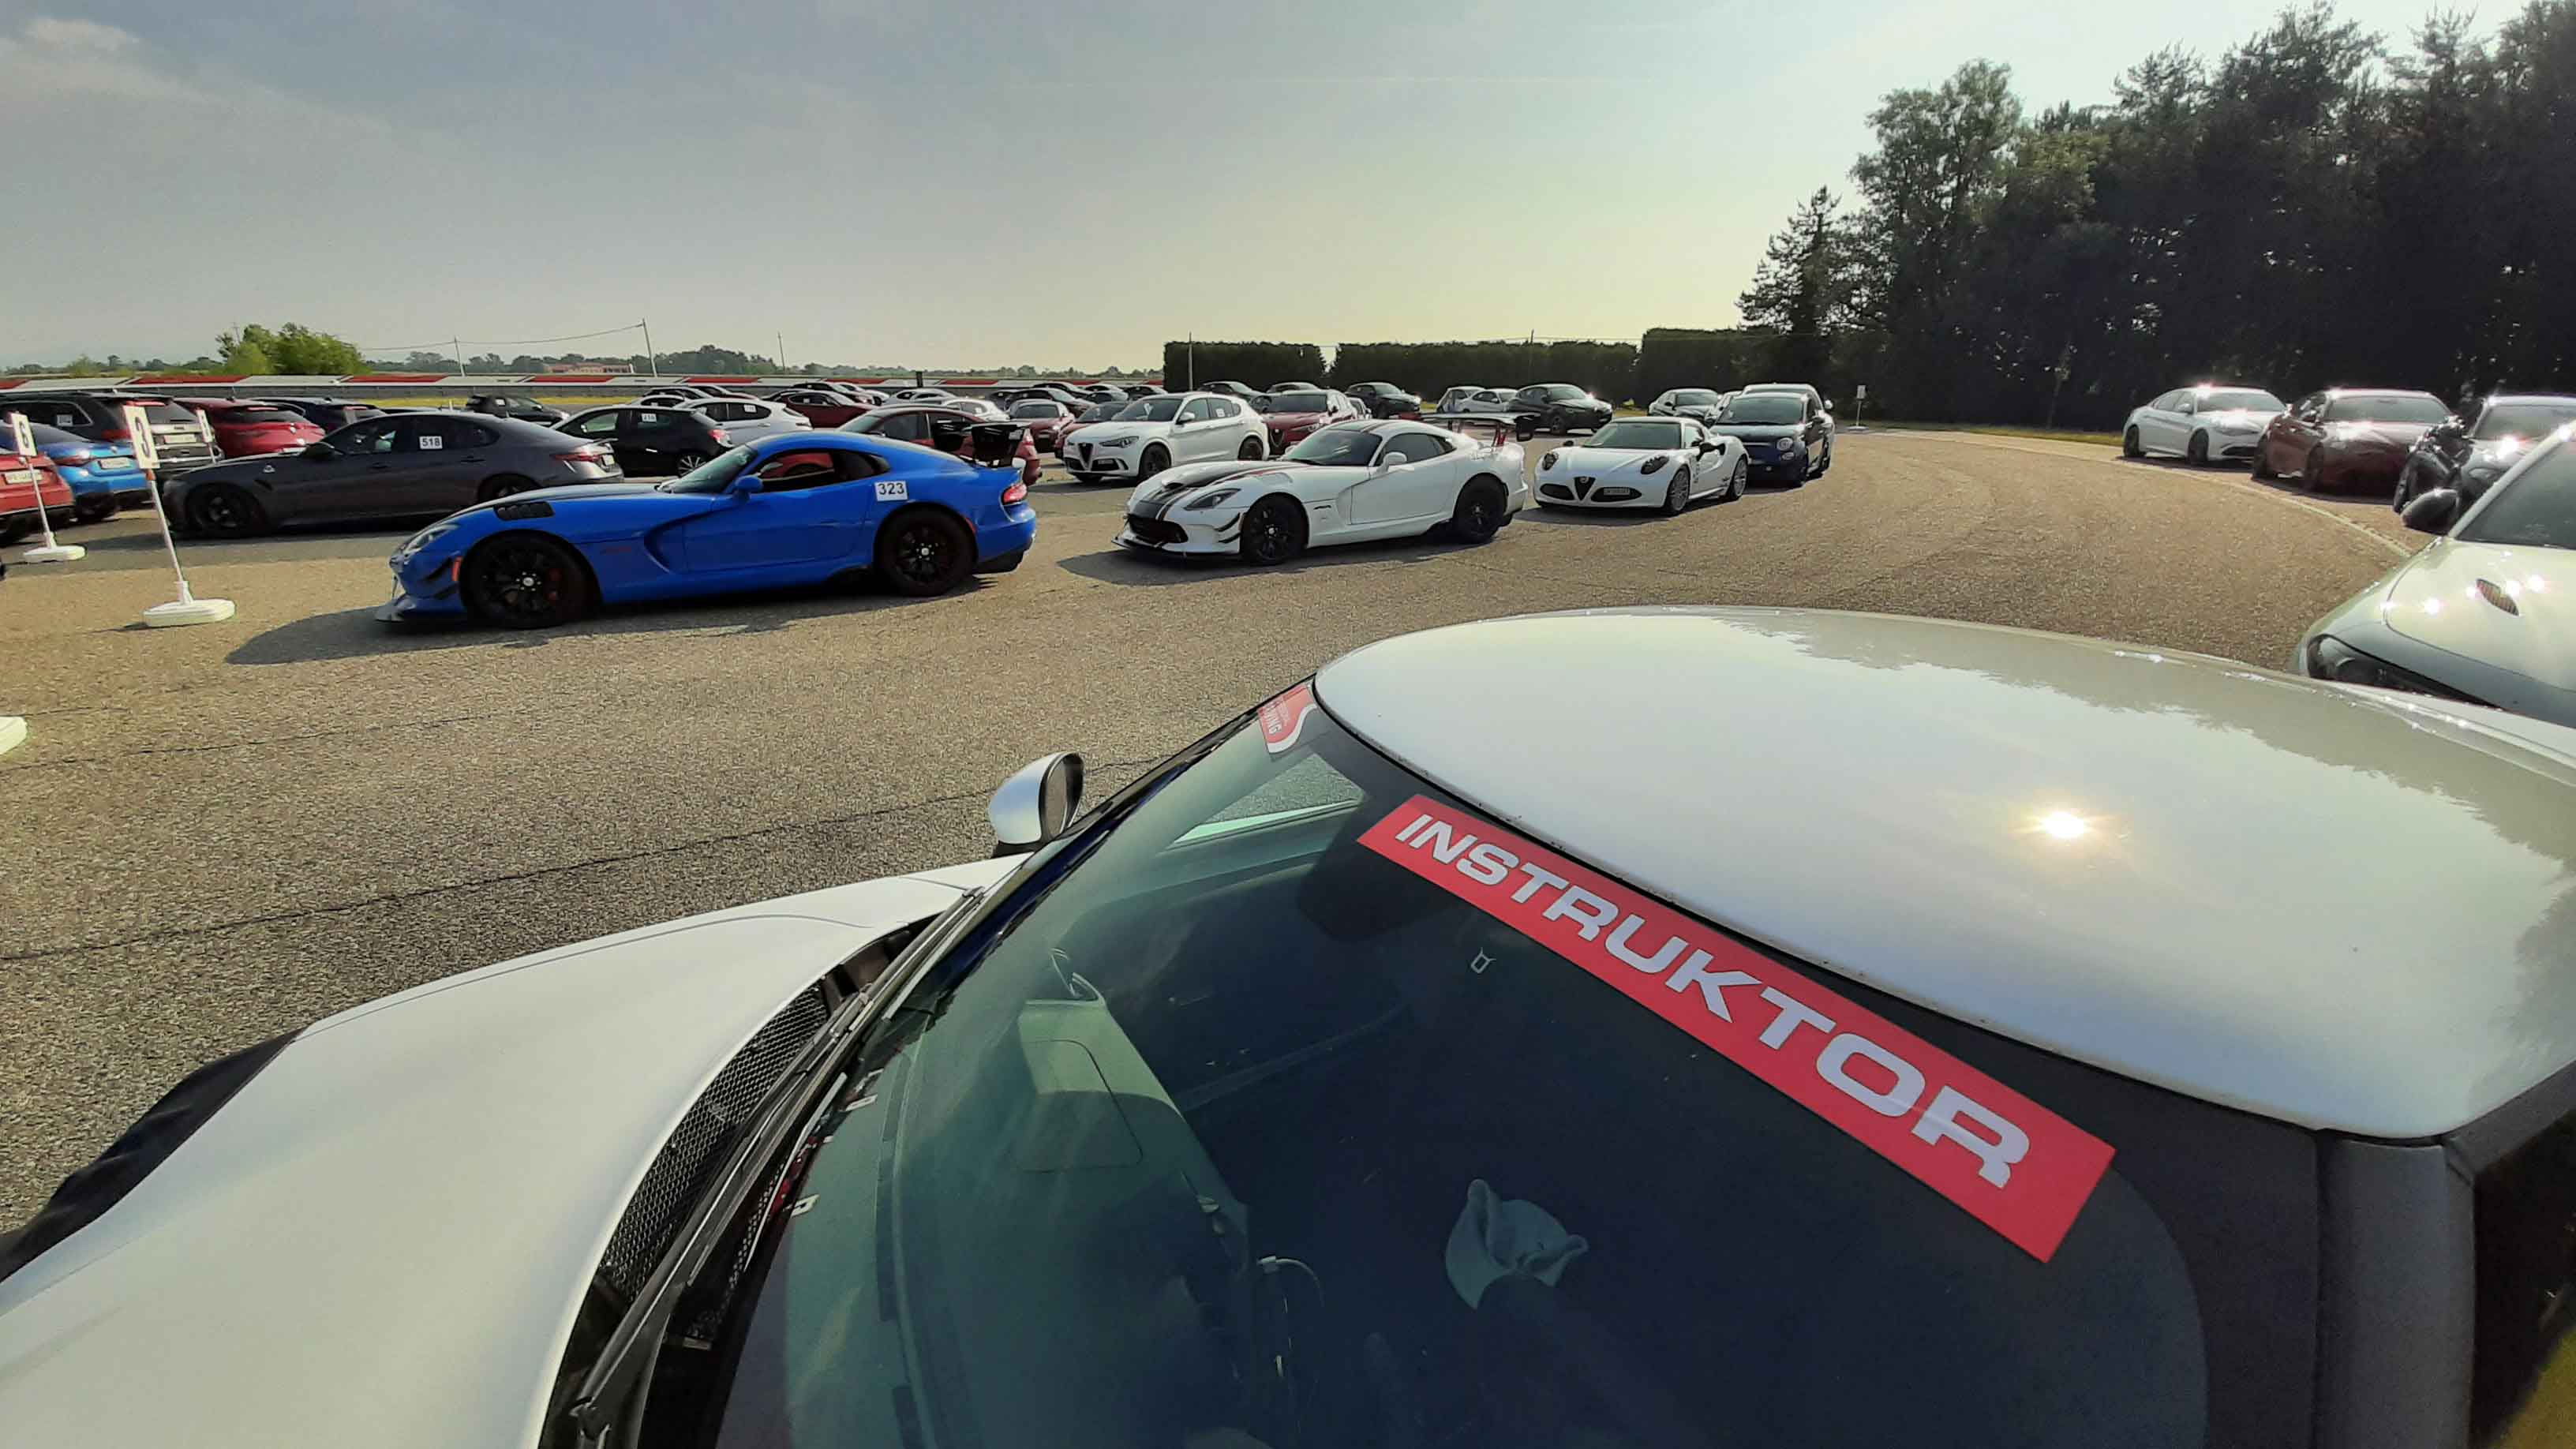 Photos of several cars parked for an event